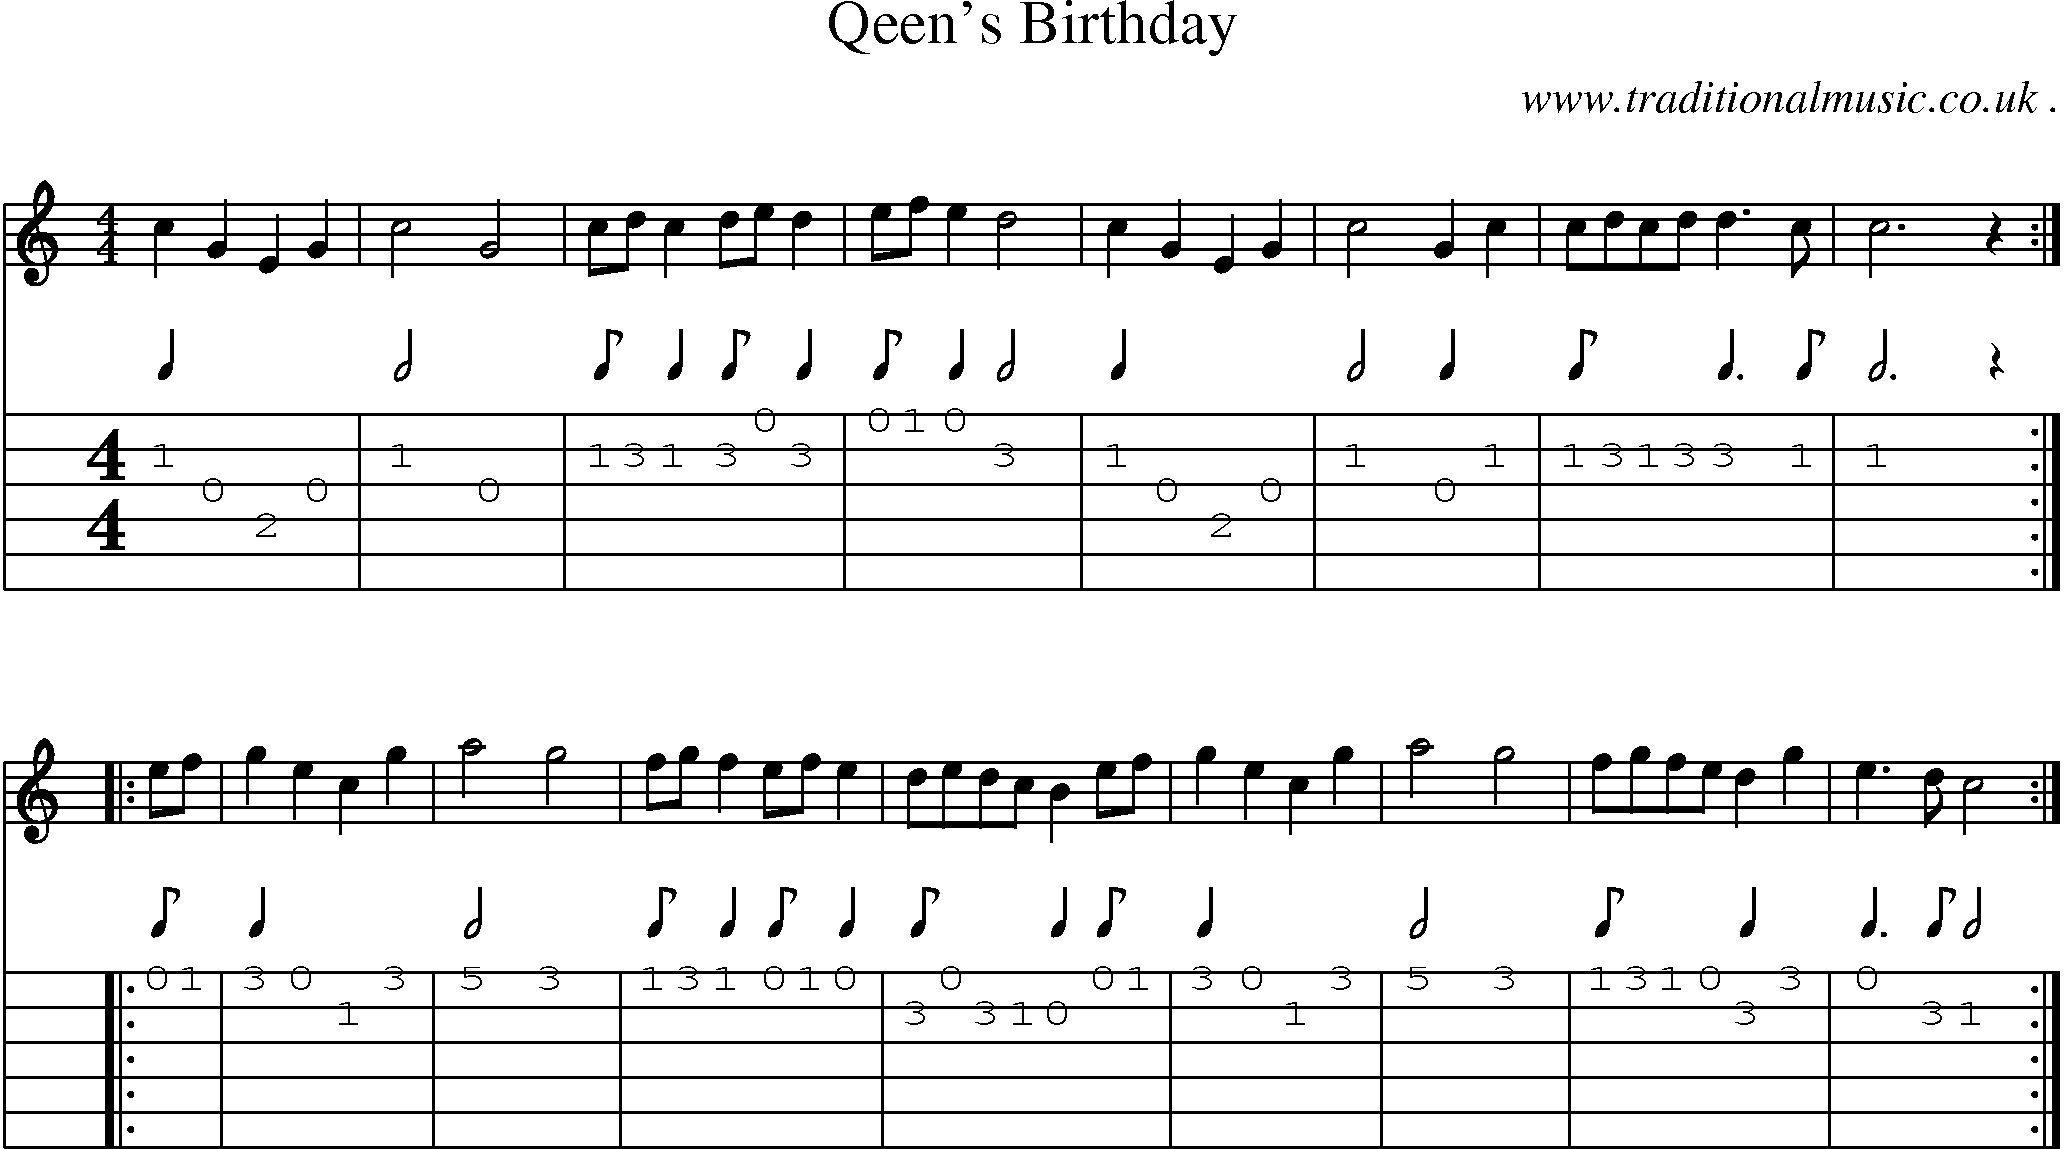 Sheet-Music and Guitar Tabs for Qeens Birthday